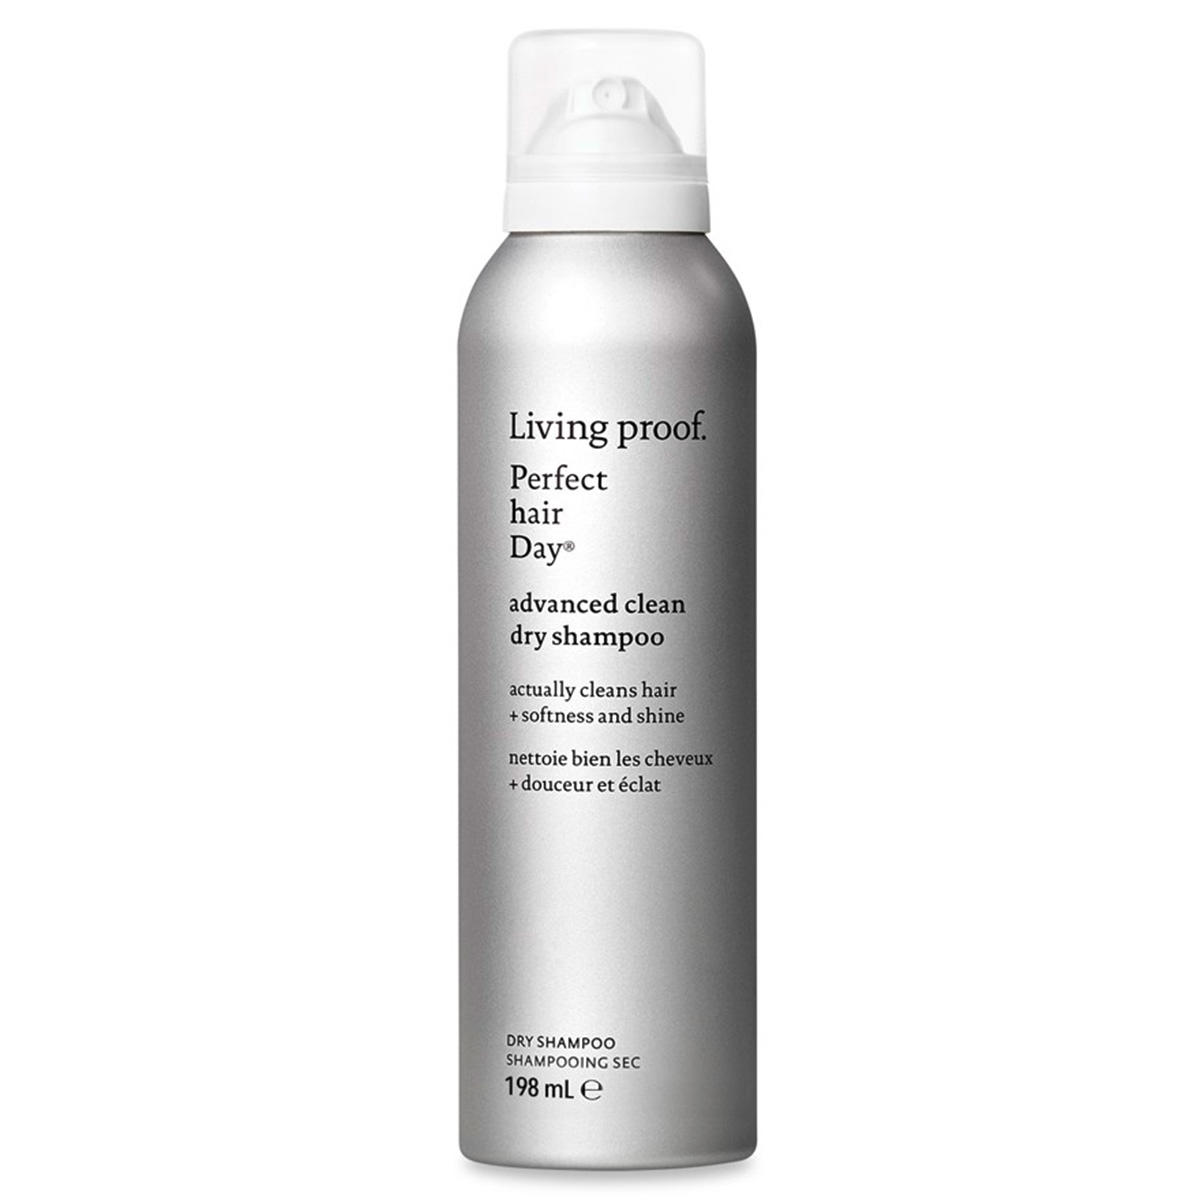 Living proof Perfect hair Day Advanced Clean Dry Shampoo  - 1